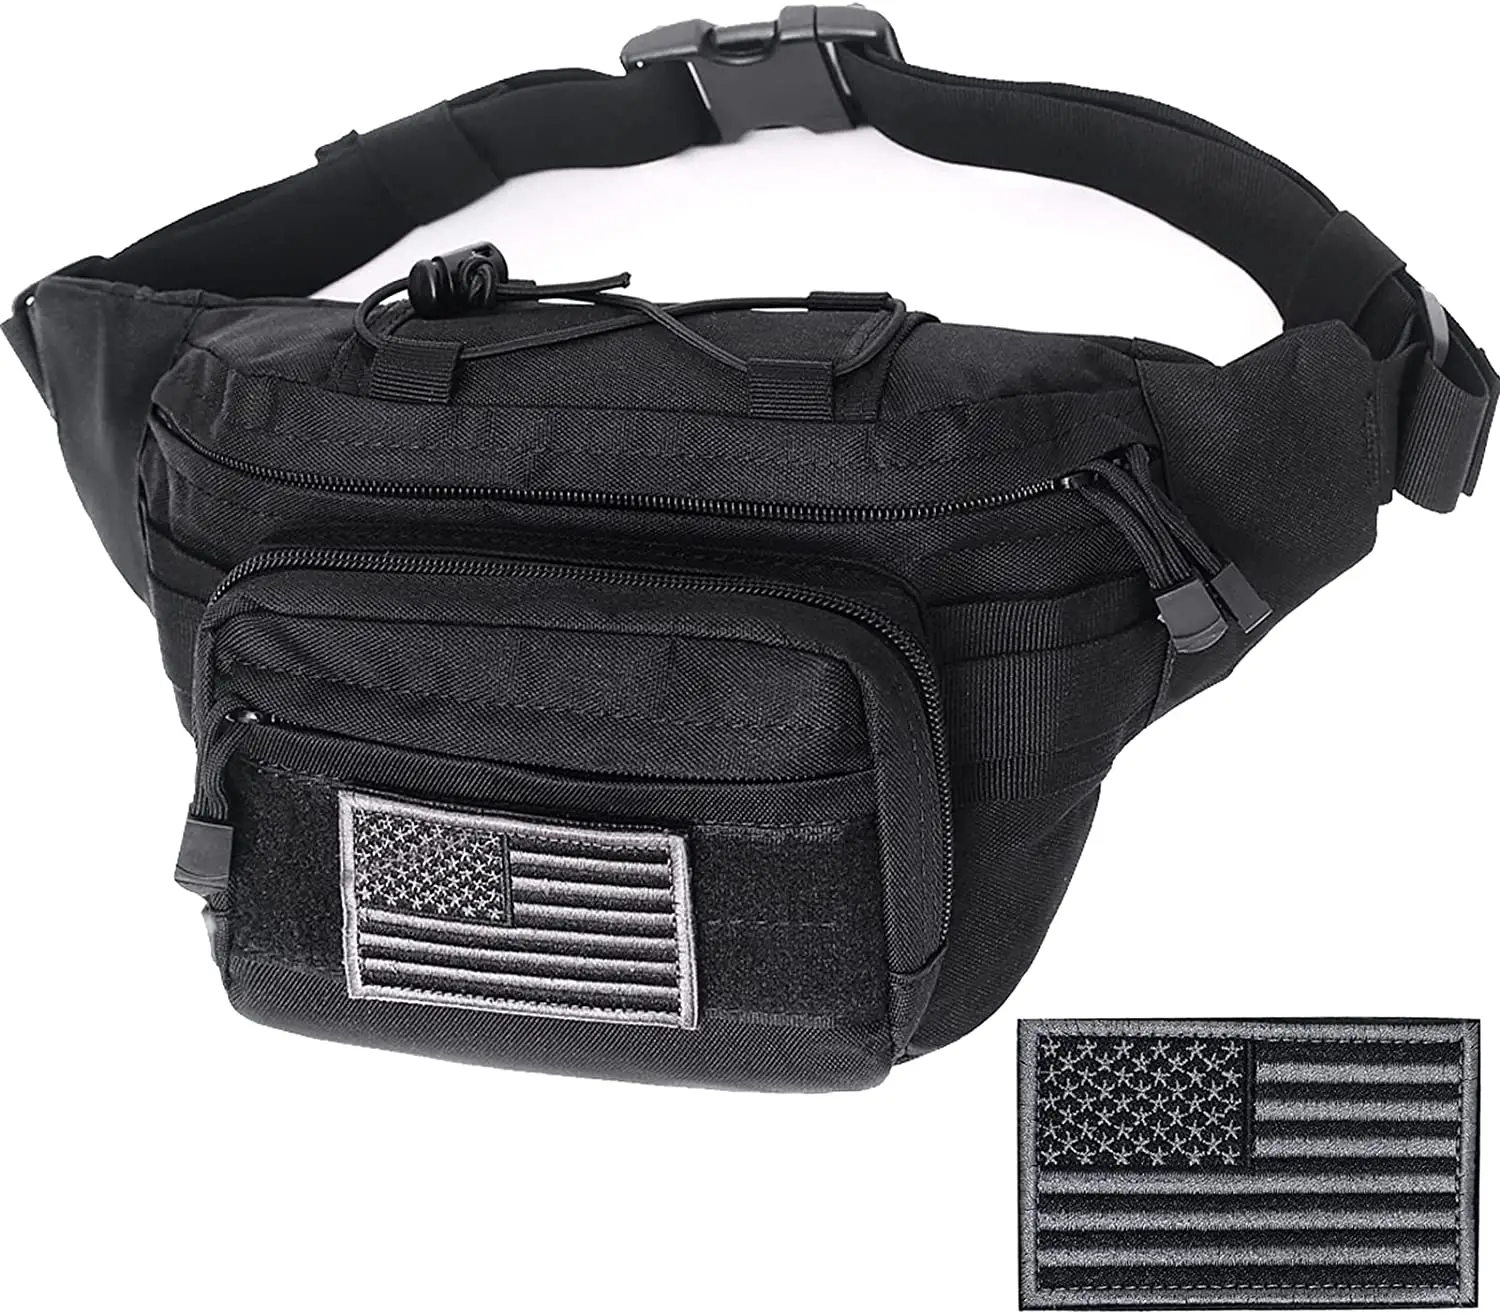 Black Tactical Fanny Pack for Outdoor Hiking with U.S Patch